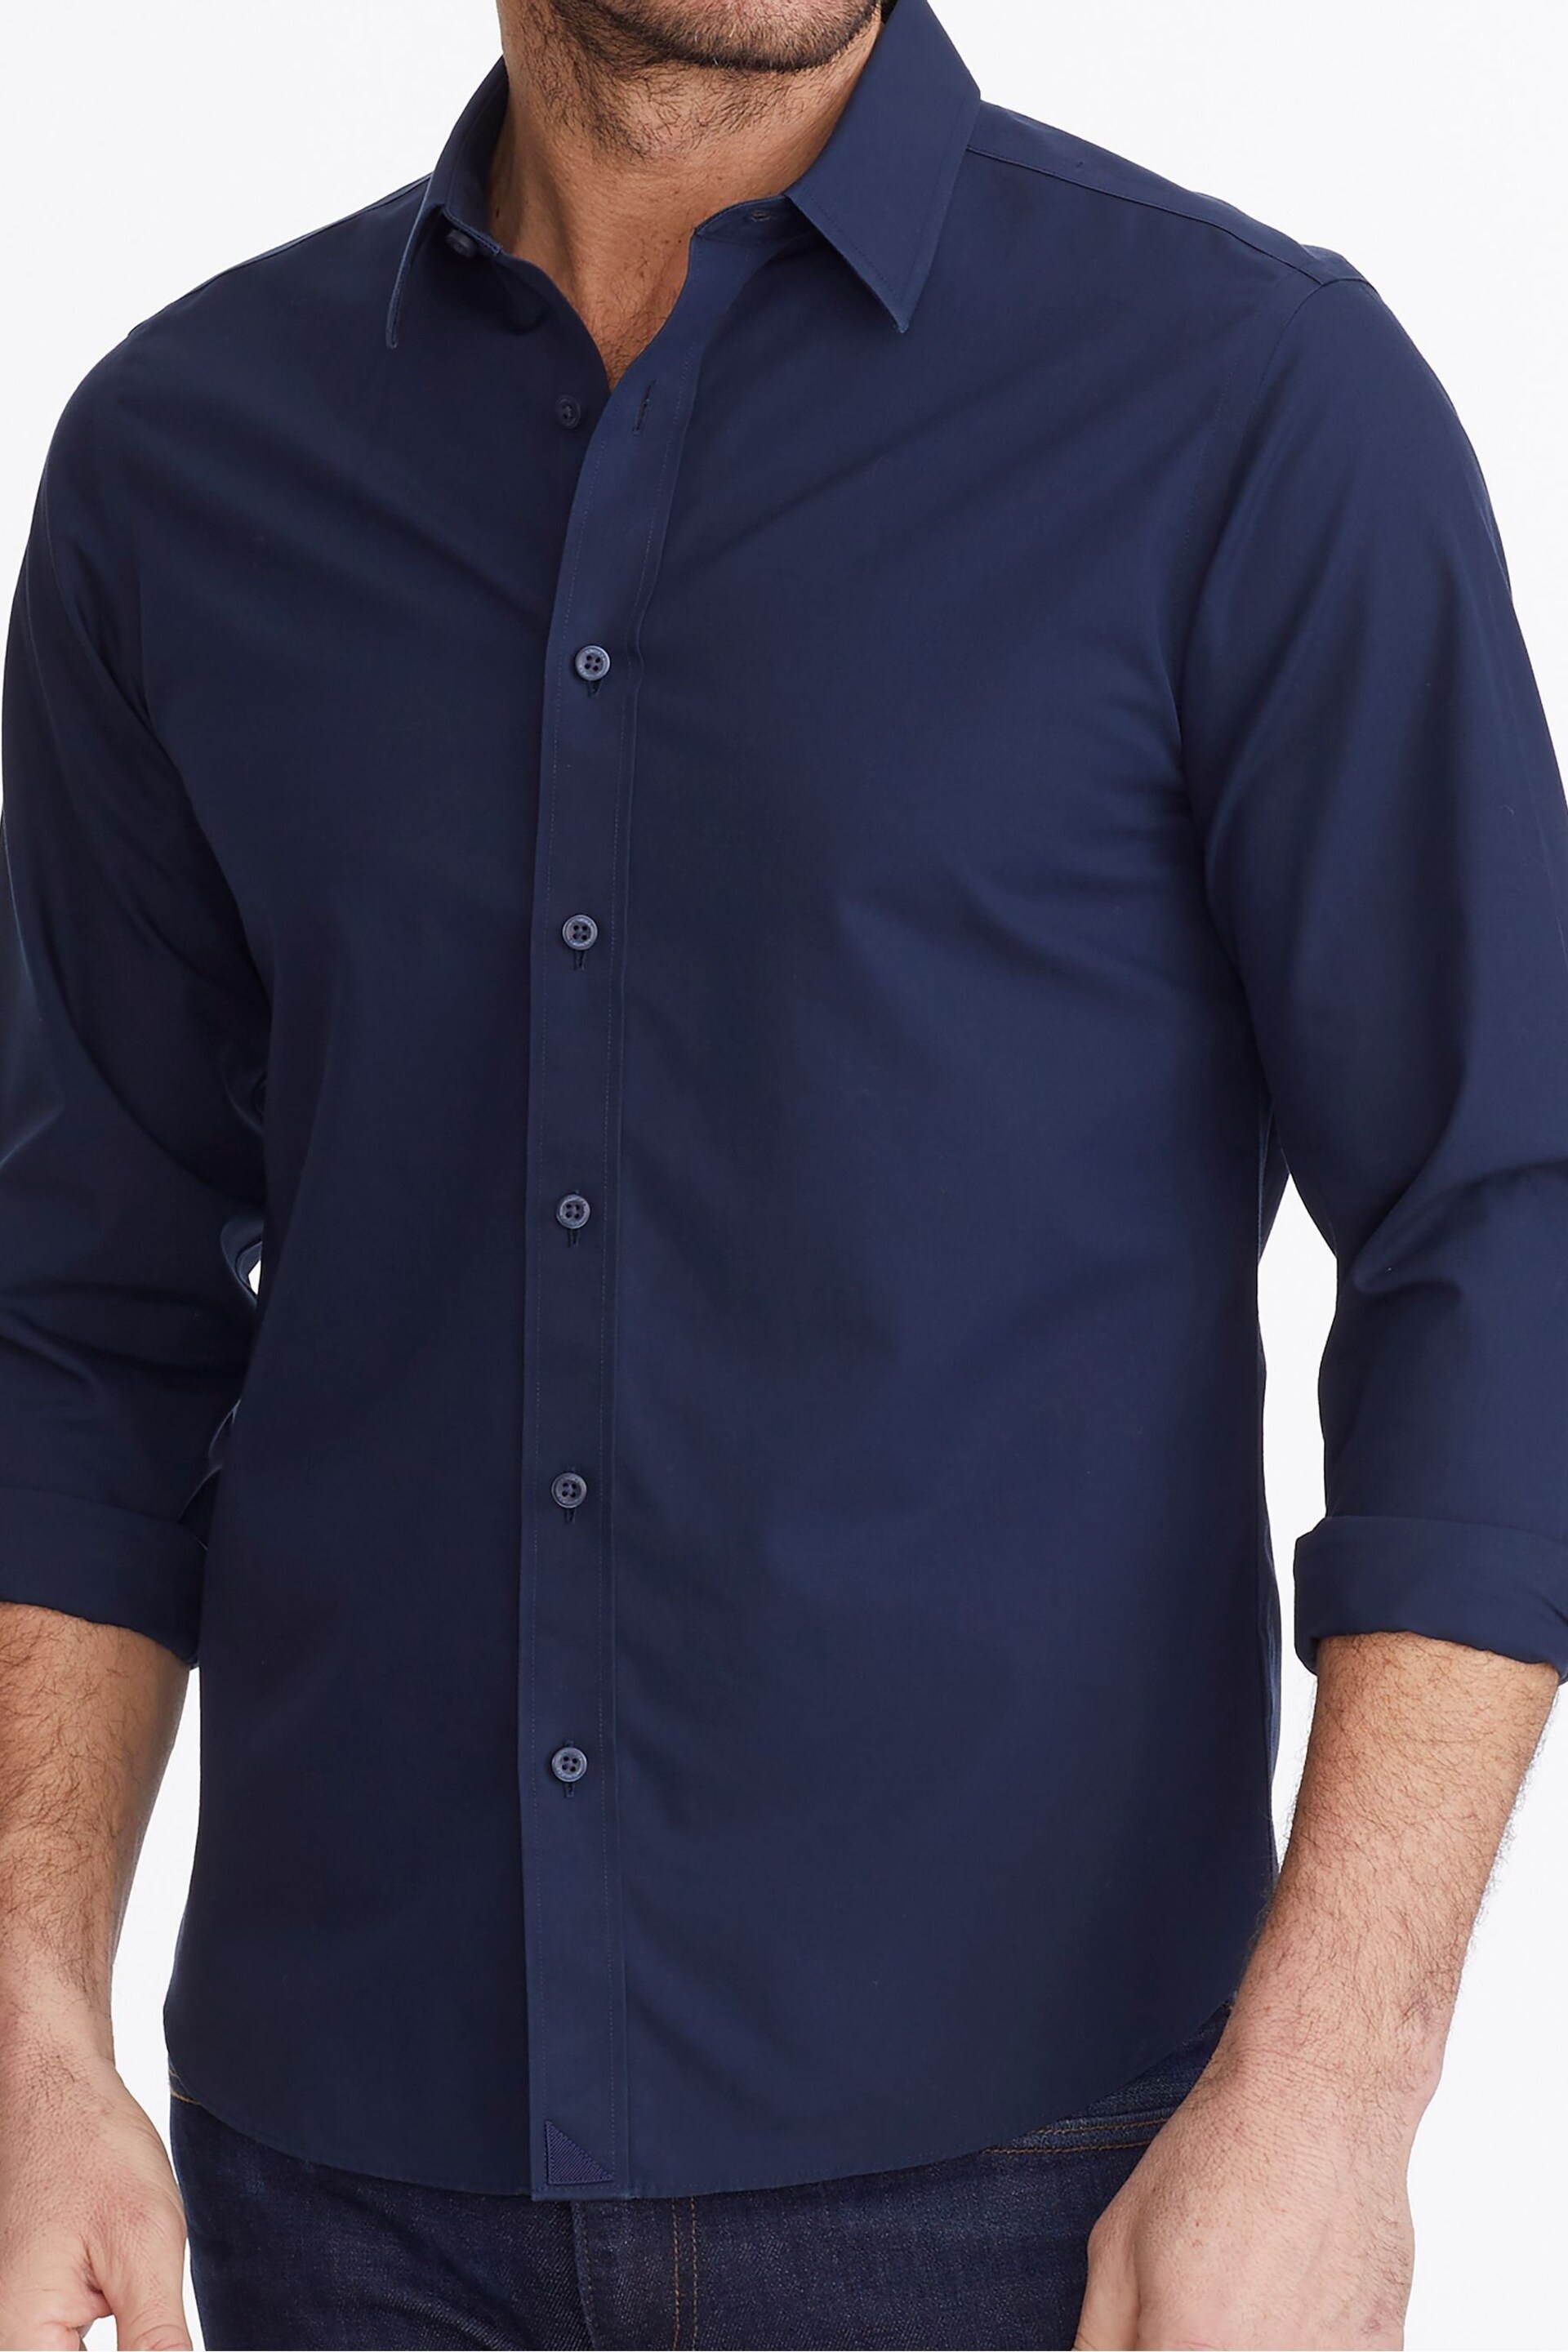 UNTUCKit Blue Dark Wrinkle-Free Relaxed Fit Castello Shirt - Image 6 of 6